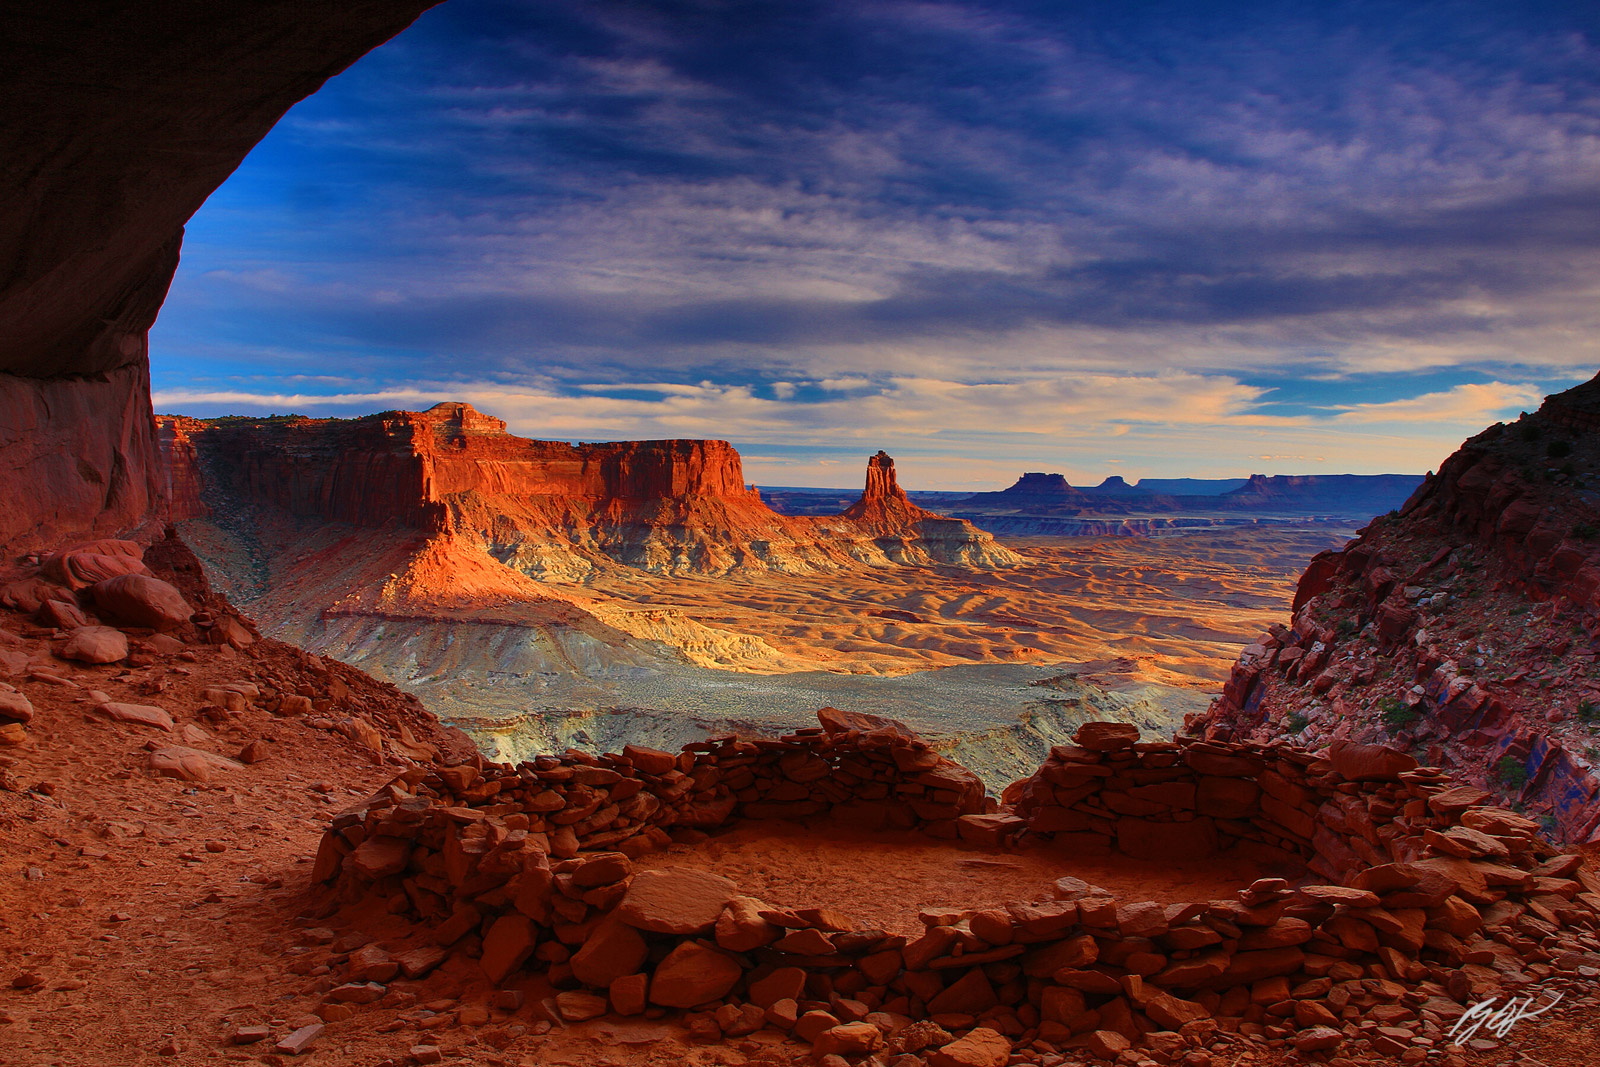 Evening Light and the False Kiva in Canyonlands National Park in Utah